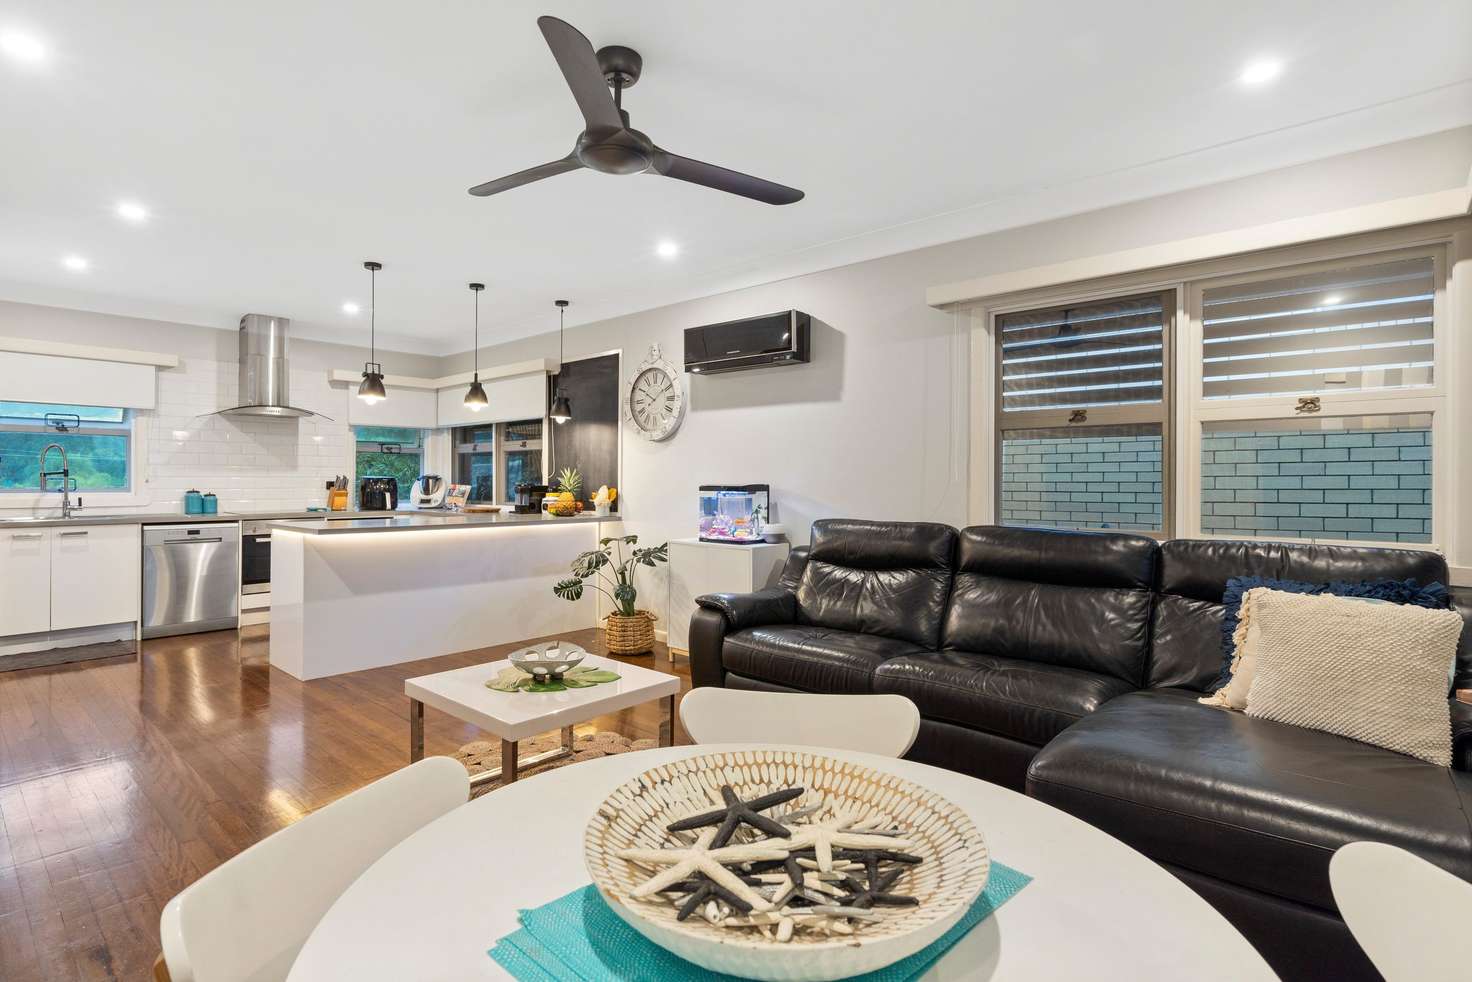 Main view of Homely house listing, 6 Winders Avenue, Tugun QLD 4224